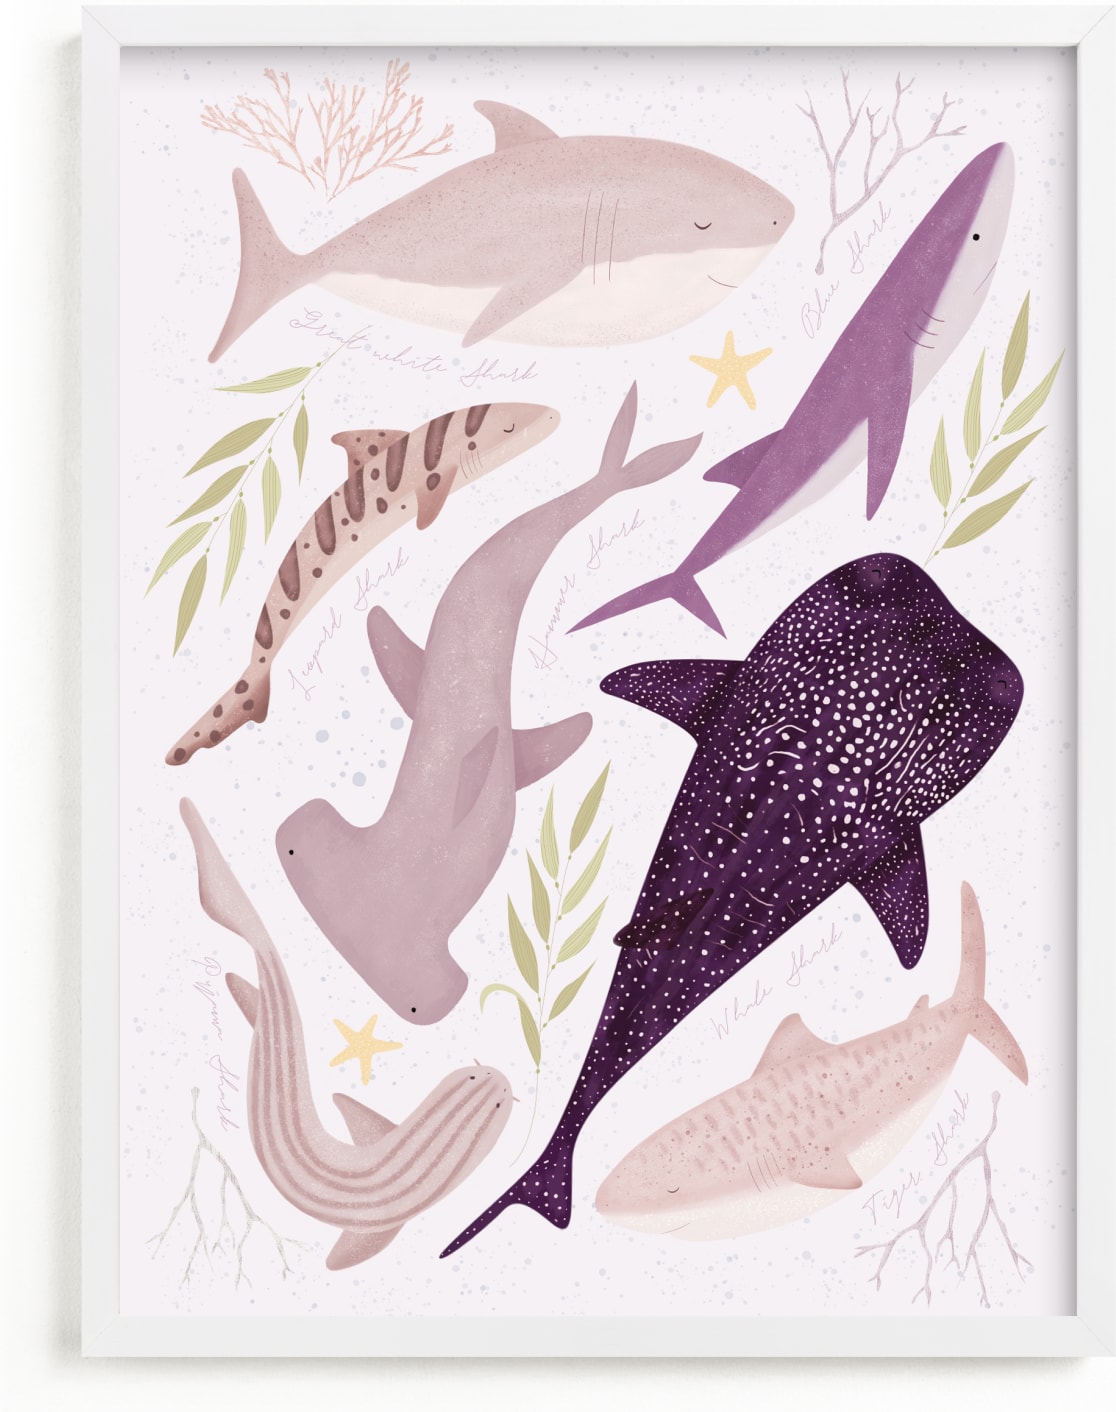 This is a purple art by Sabrin Deirani called Marvelous sharks.